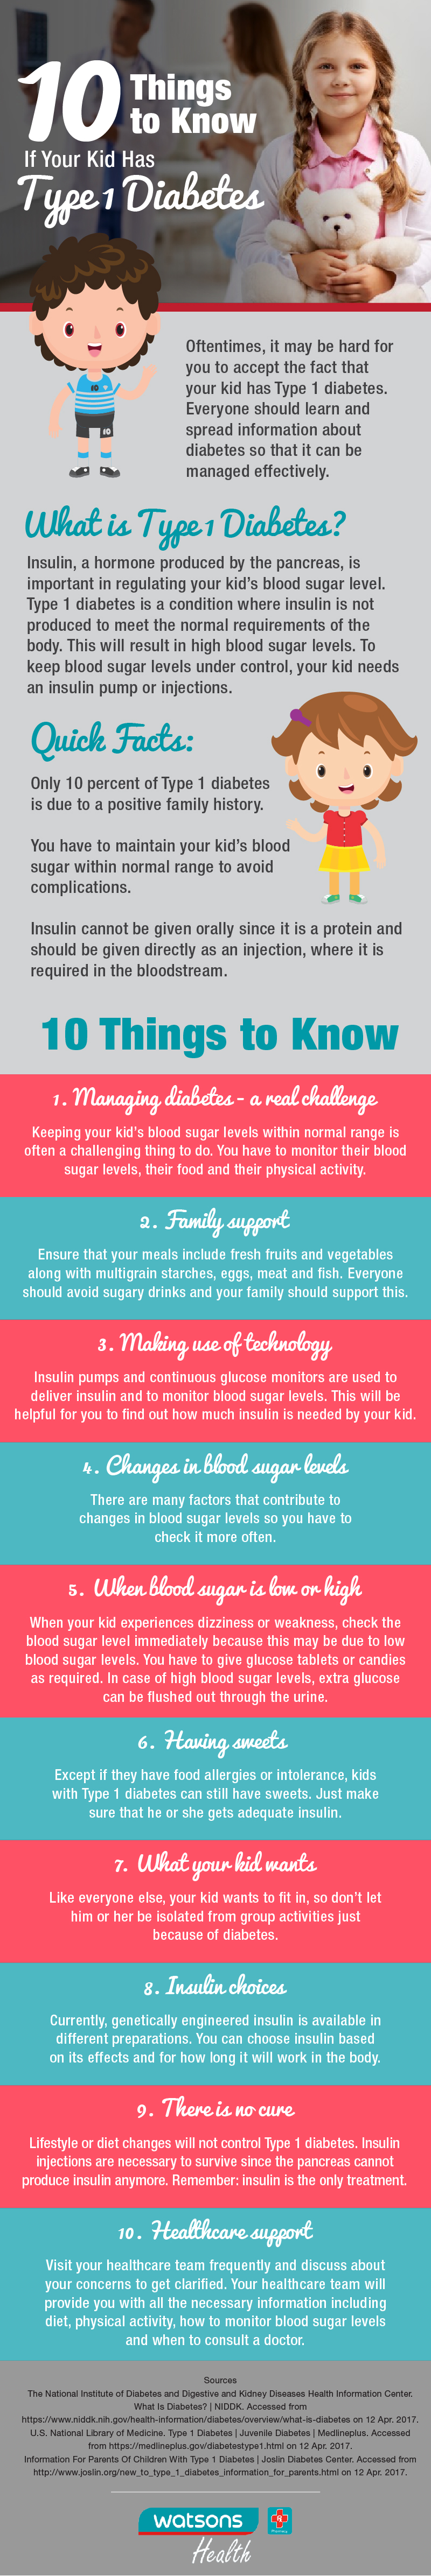 Watsons_10 Things to Know If Your Kid Has Type 1 Diabetes_v2-01